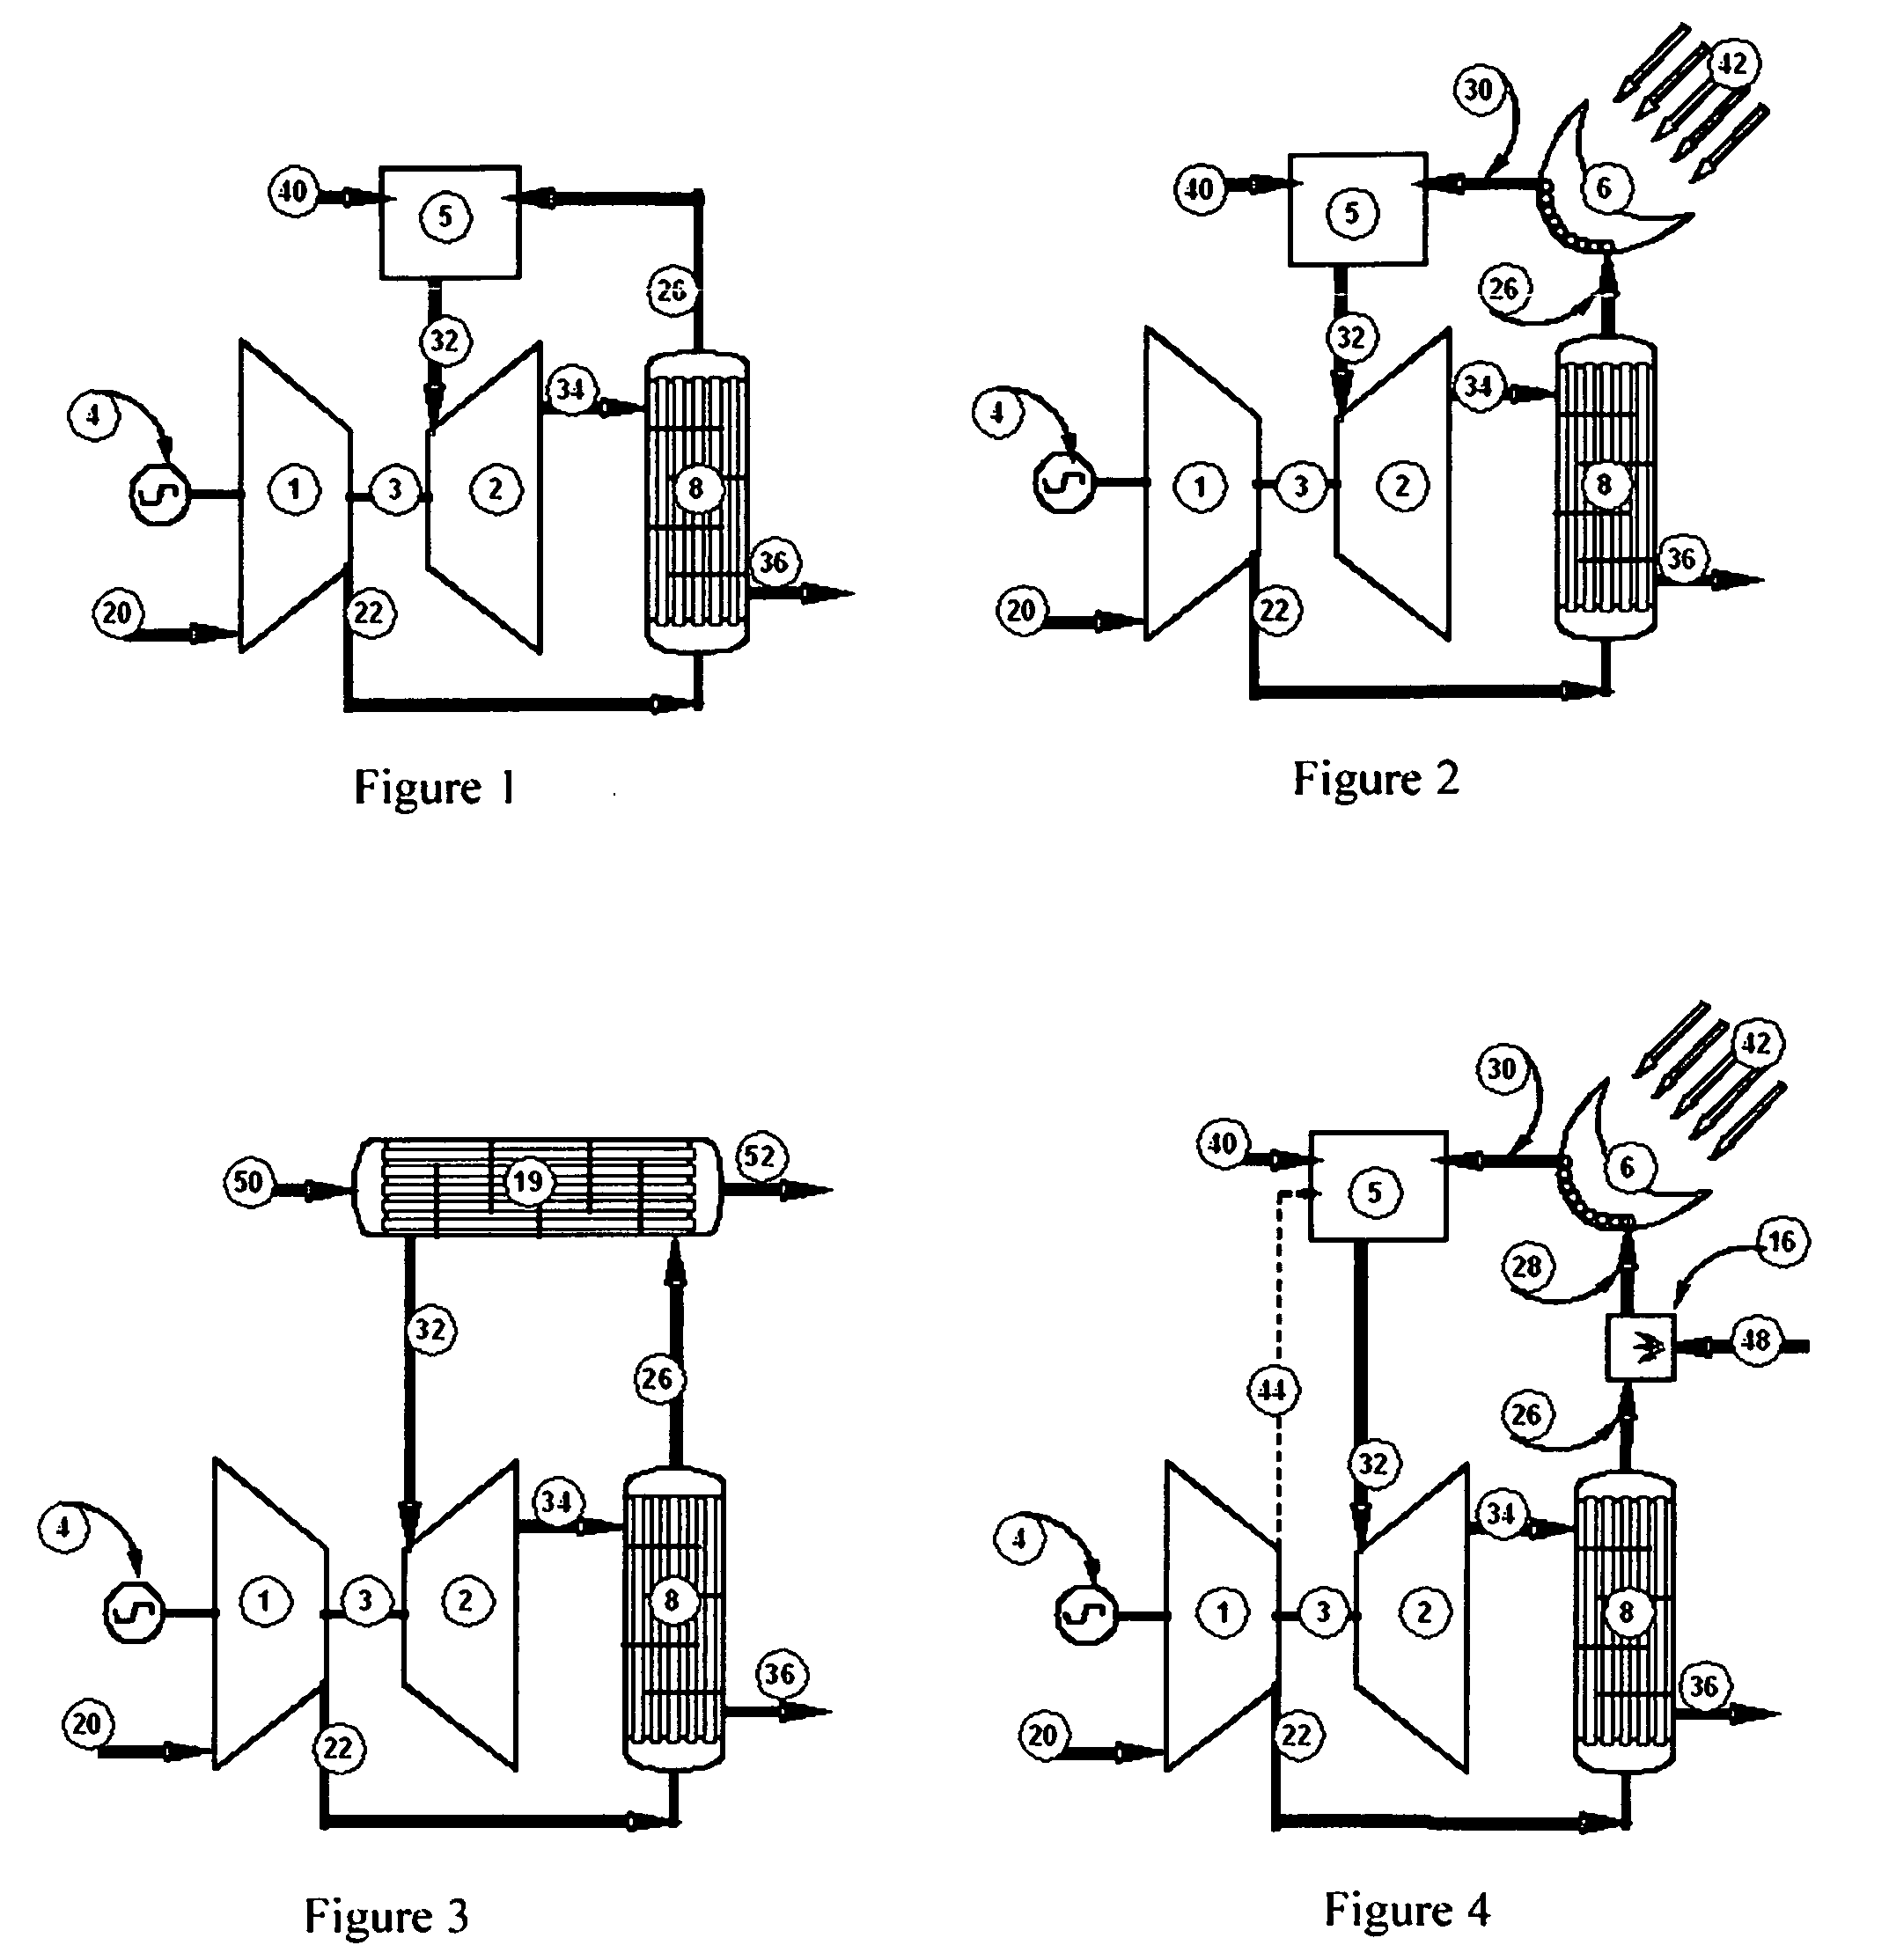 Method and apparatus for generating electricity